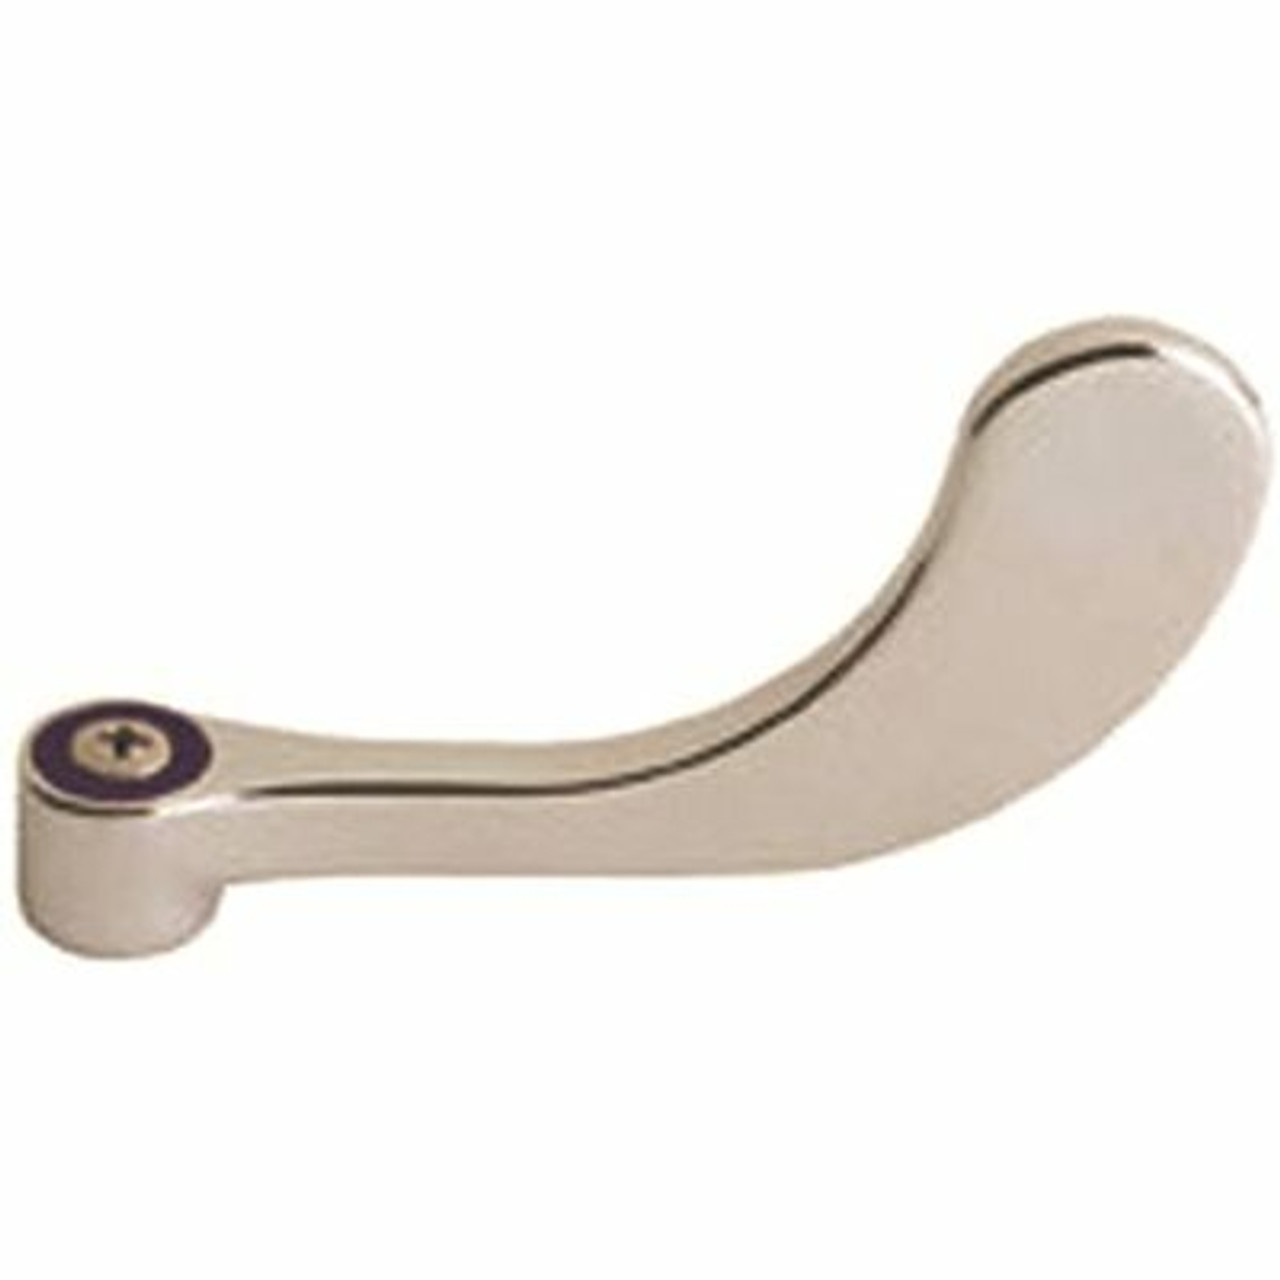 Chicago Faucets Chicago Blade Handle 4" Cold